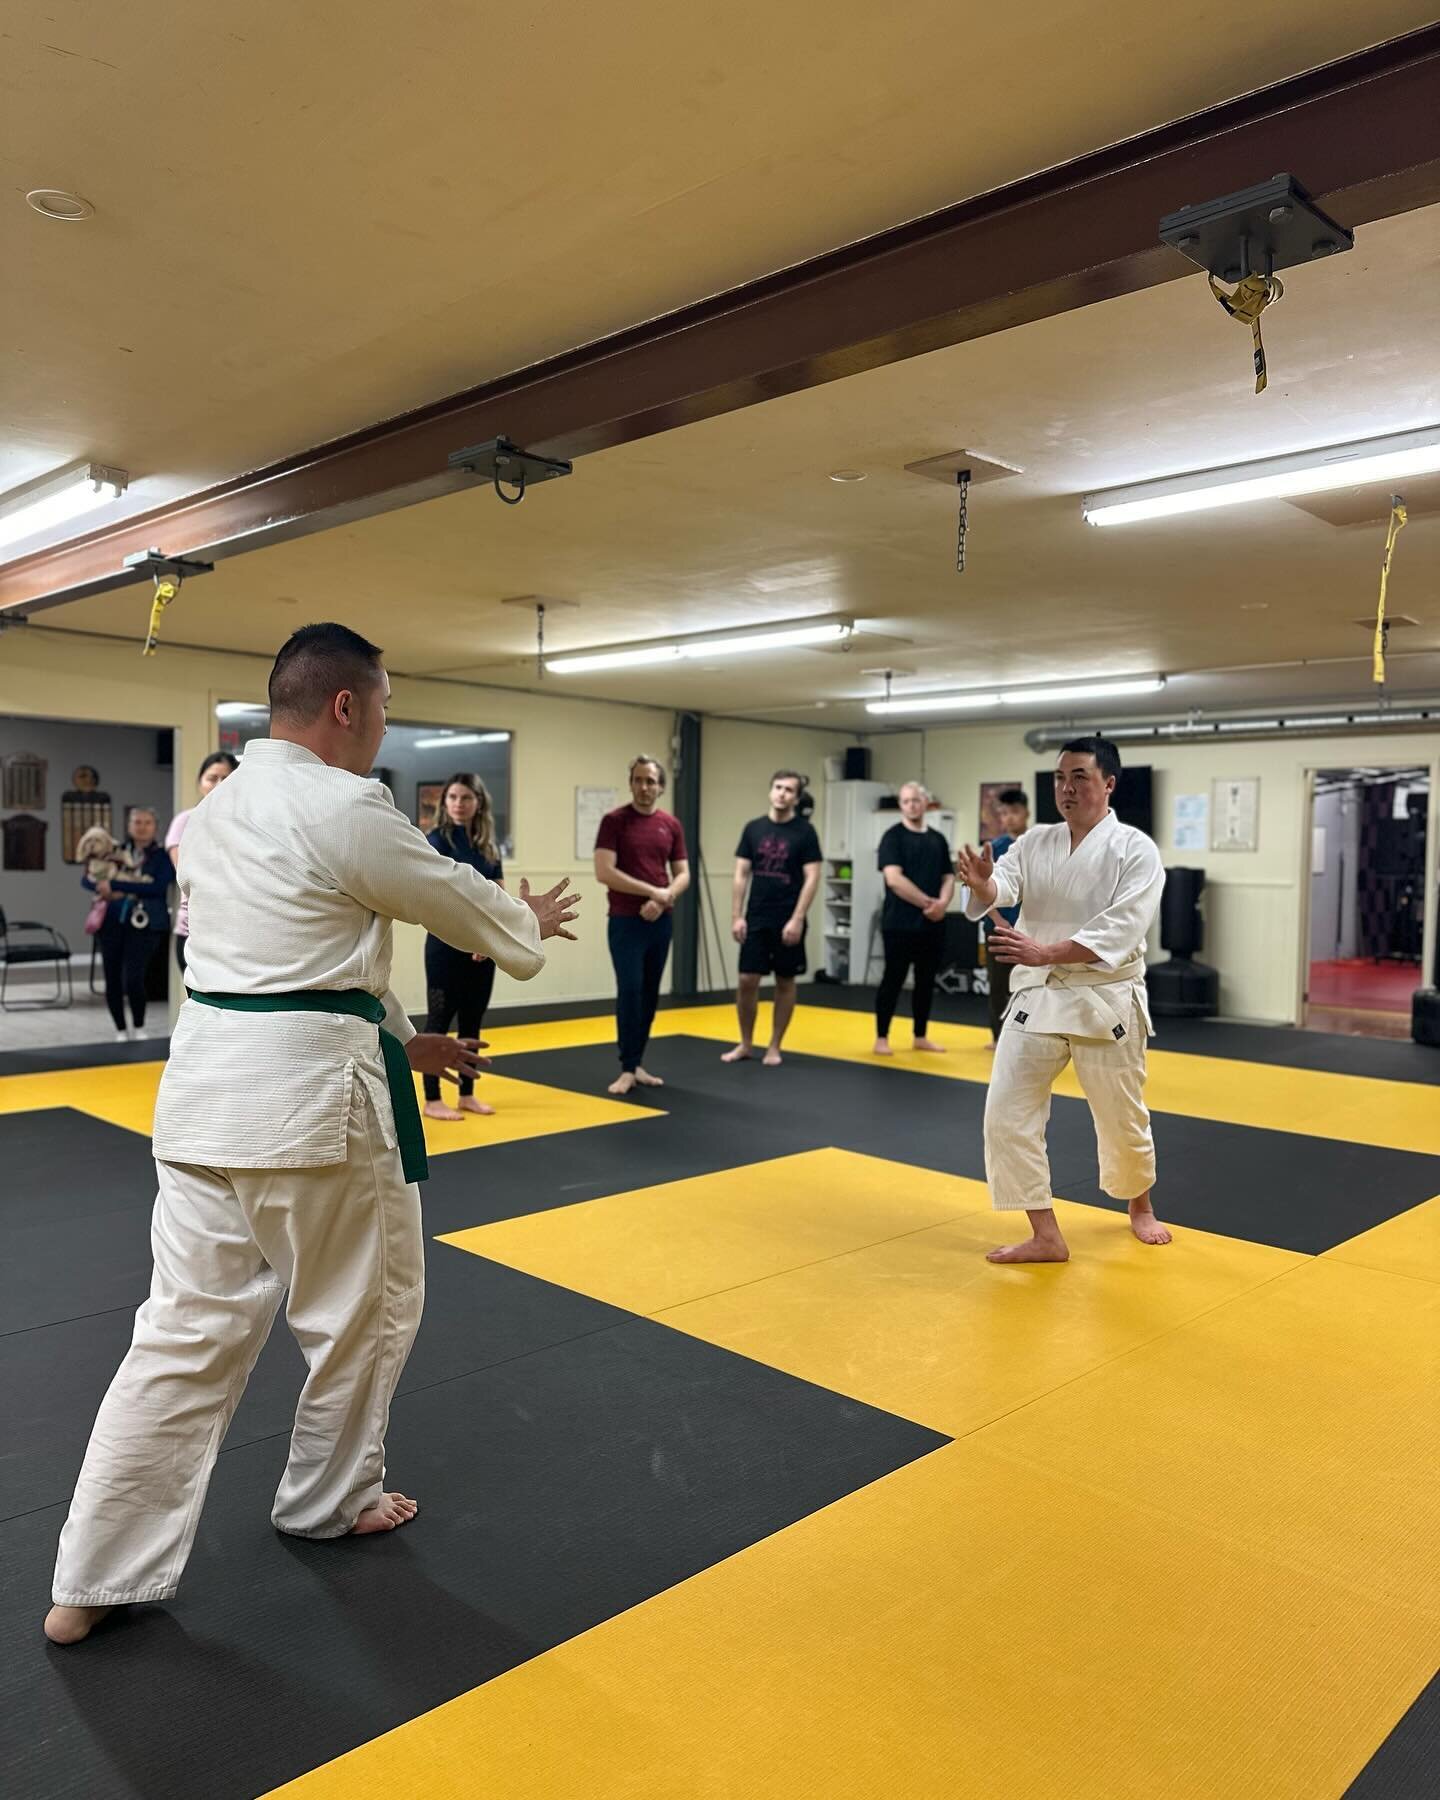 Thanks to everyone who came out to try our first teens and adults aikido class in 2024! Come join us for 2 free weeks of classes this month! #aikido #yoshinkan #yoshinkanaikido #martialarts #dojo #training #osu